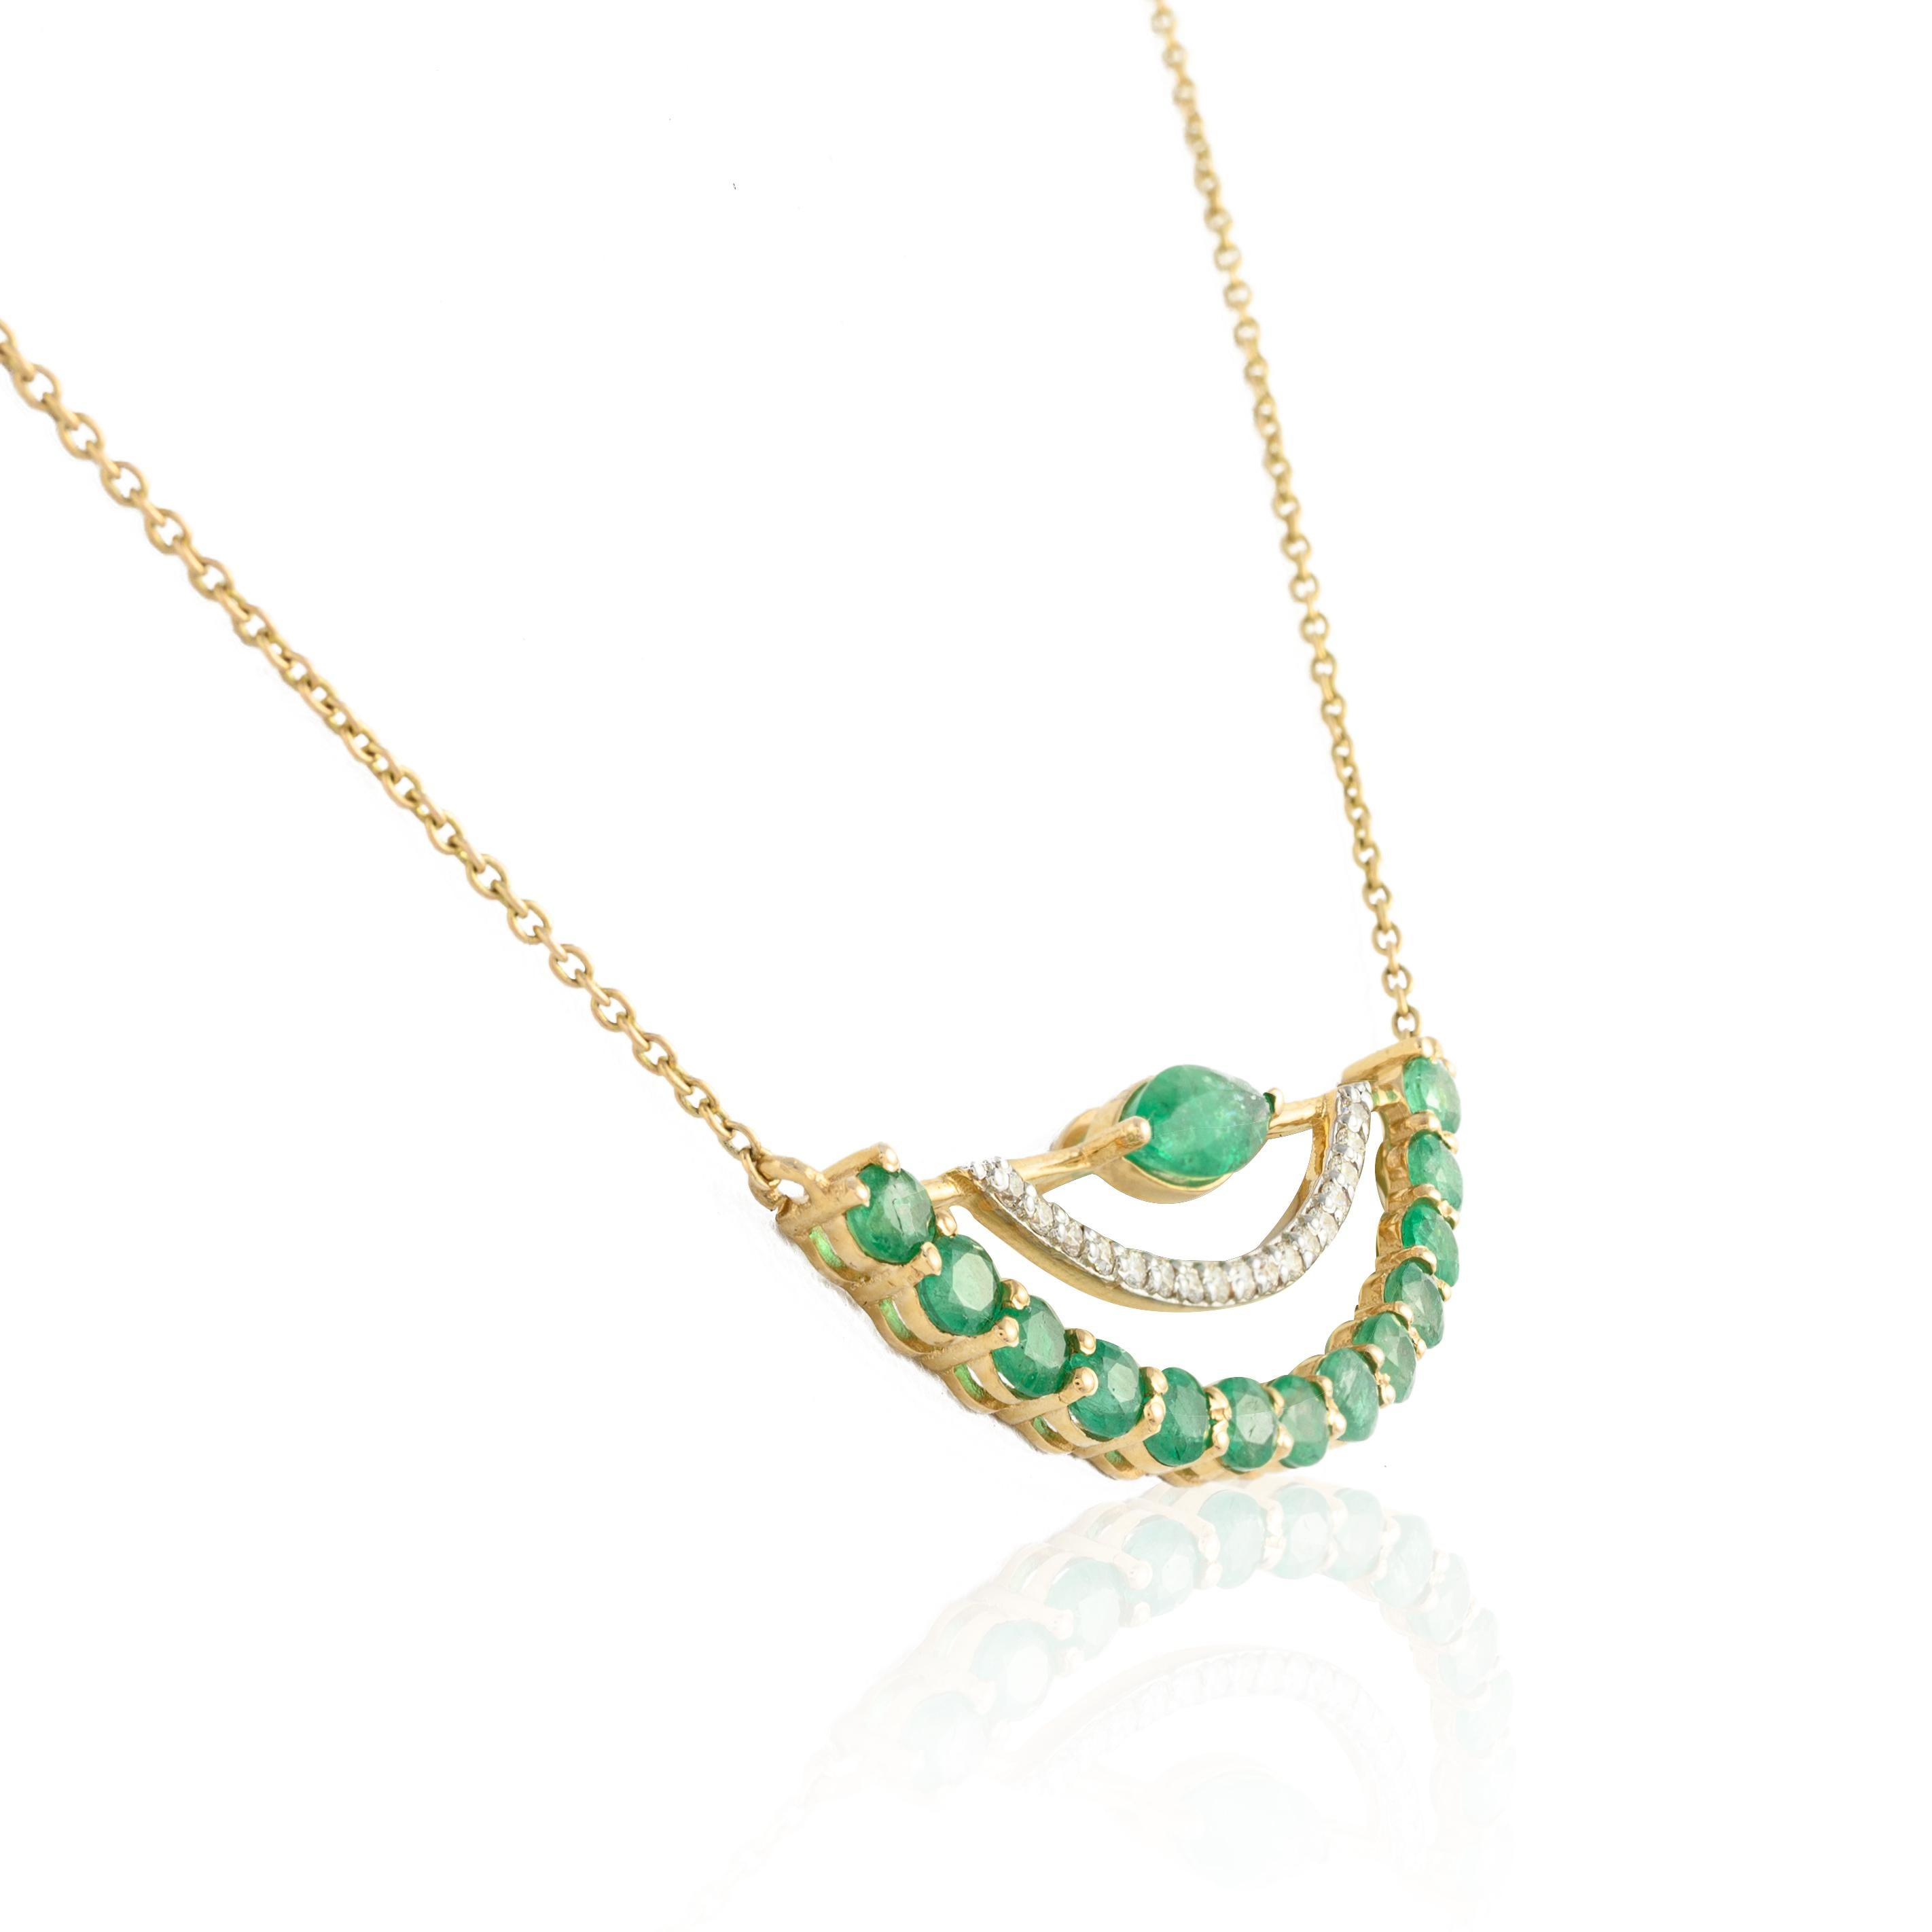 Natural Vivid Green 1.87ct Emerald Diamond Chain Necklace in 14k Yellow Gold In New Condition For Sale In Houston, TX